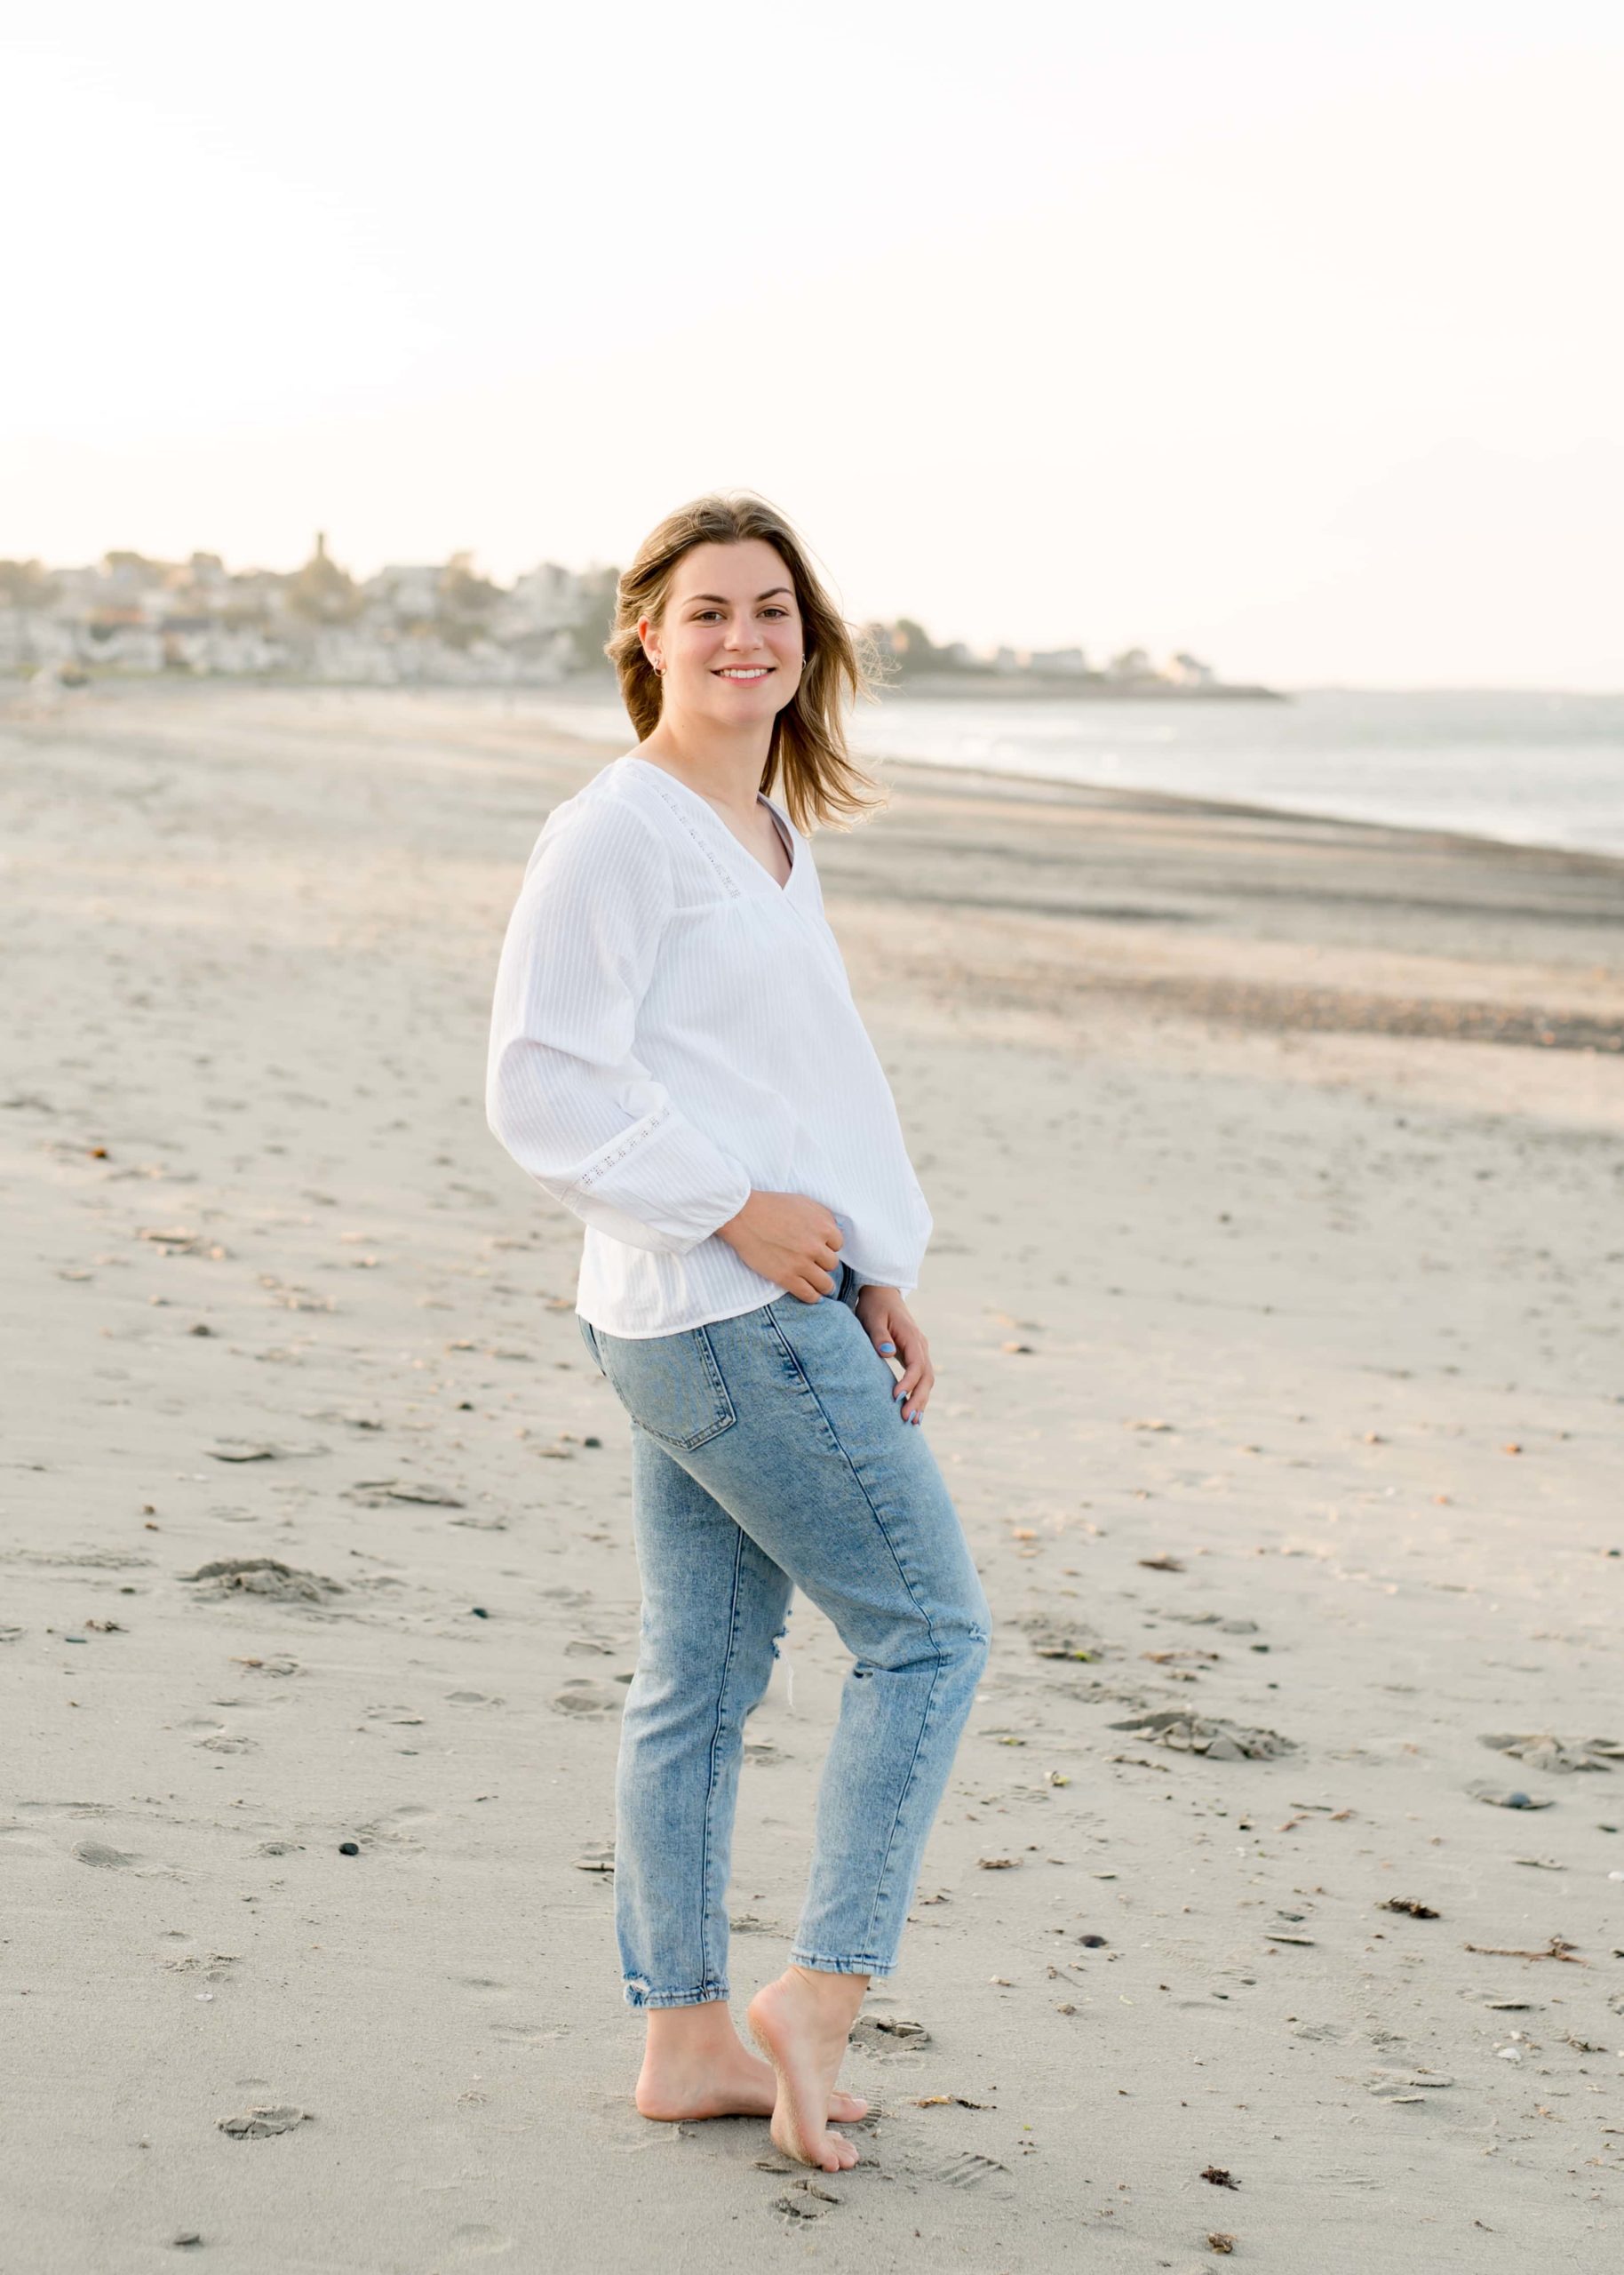 Senior pictures at Nantasket Beach with a white shirt and blue jeans